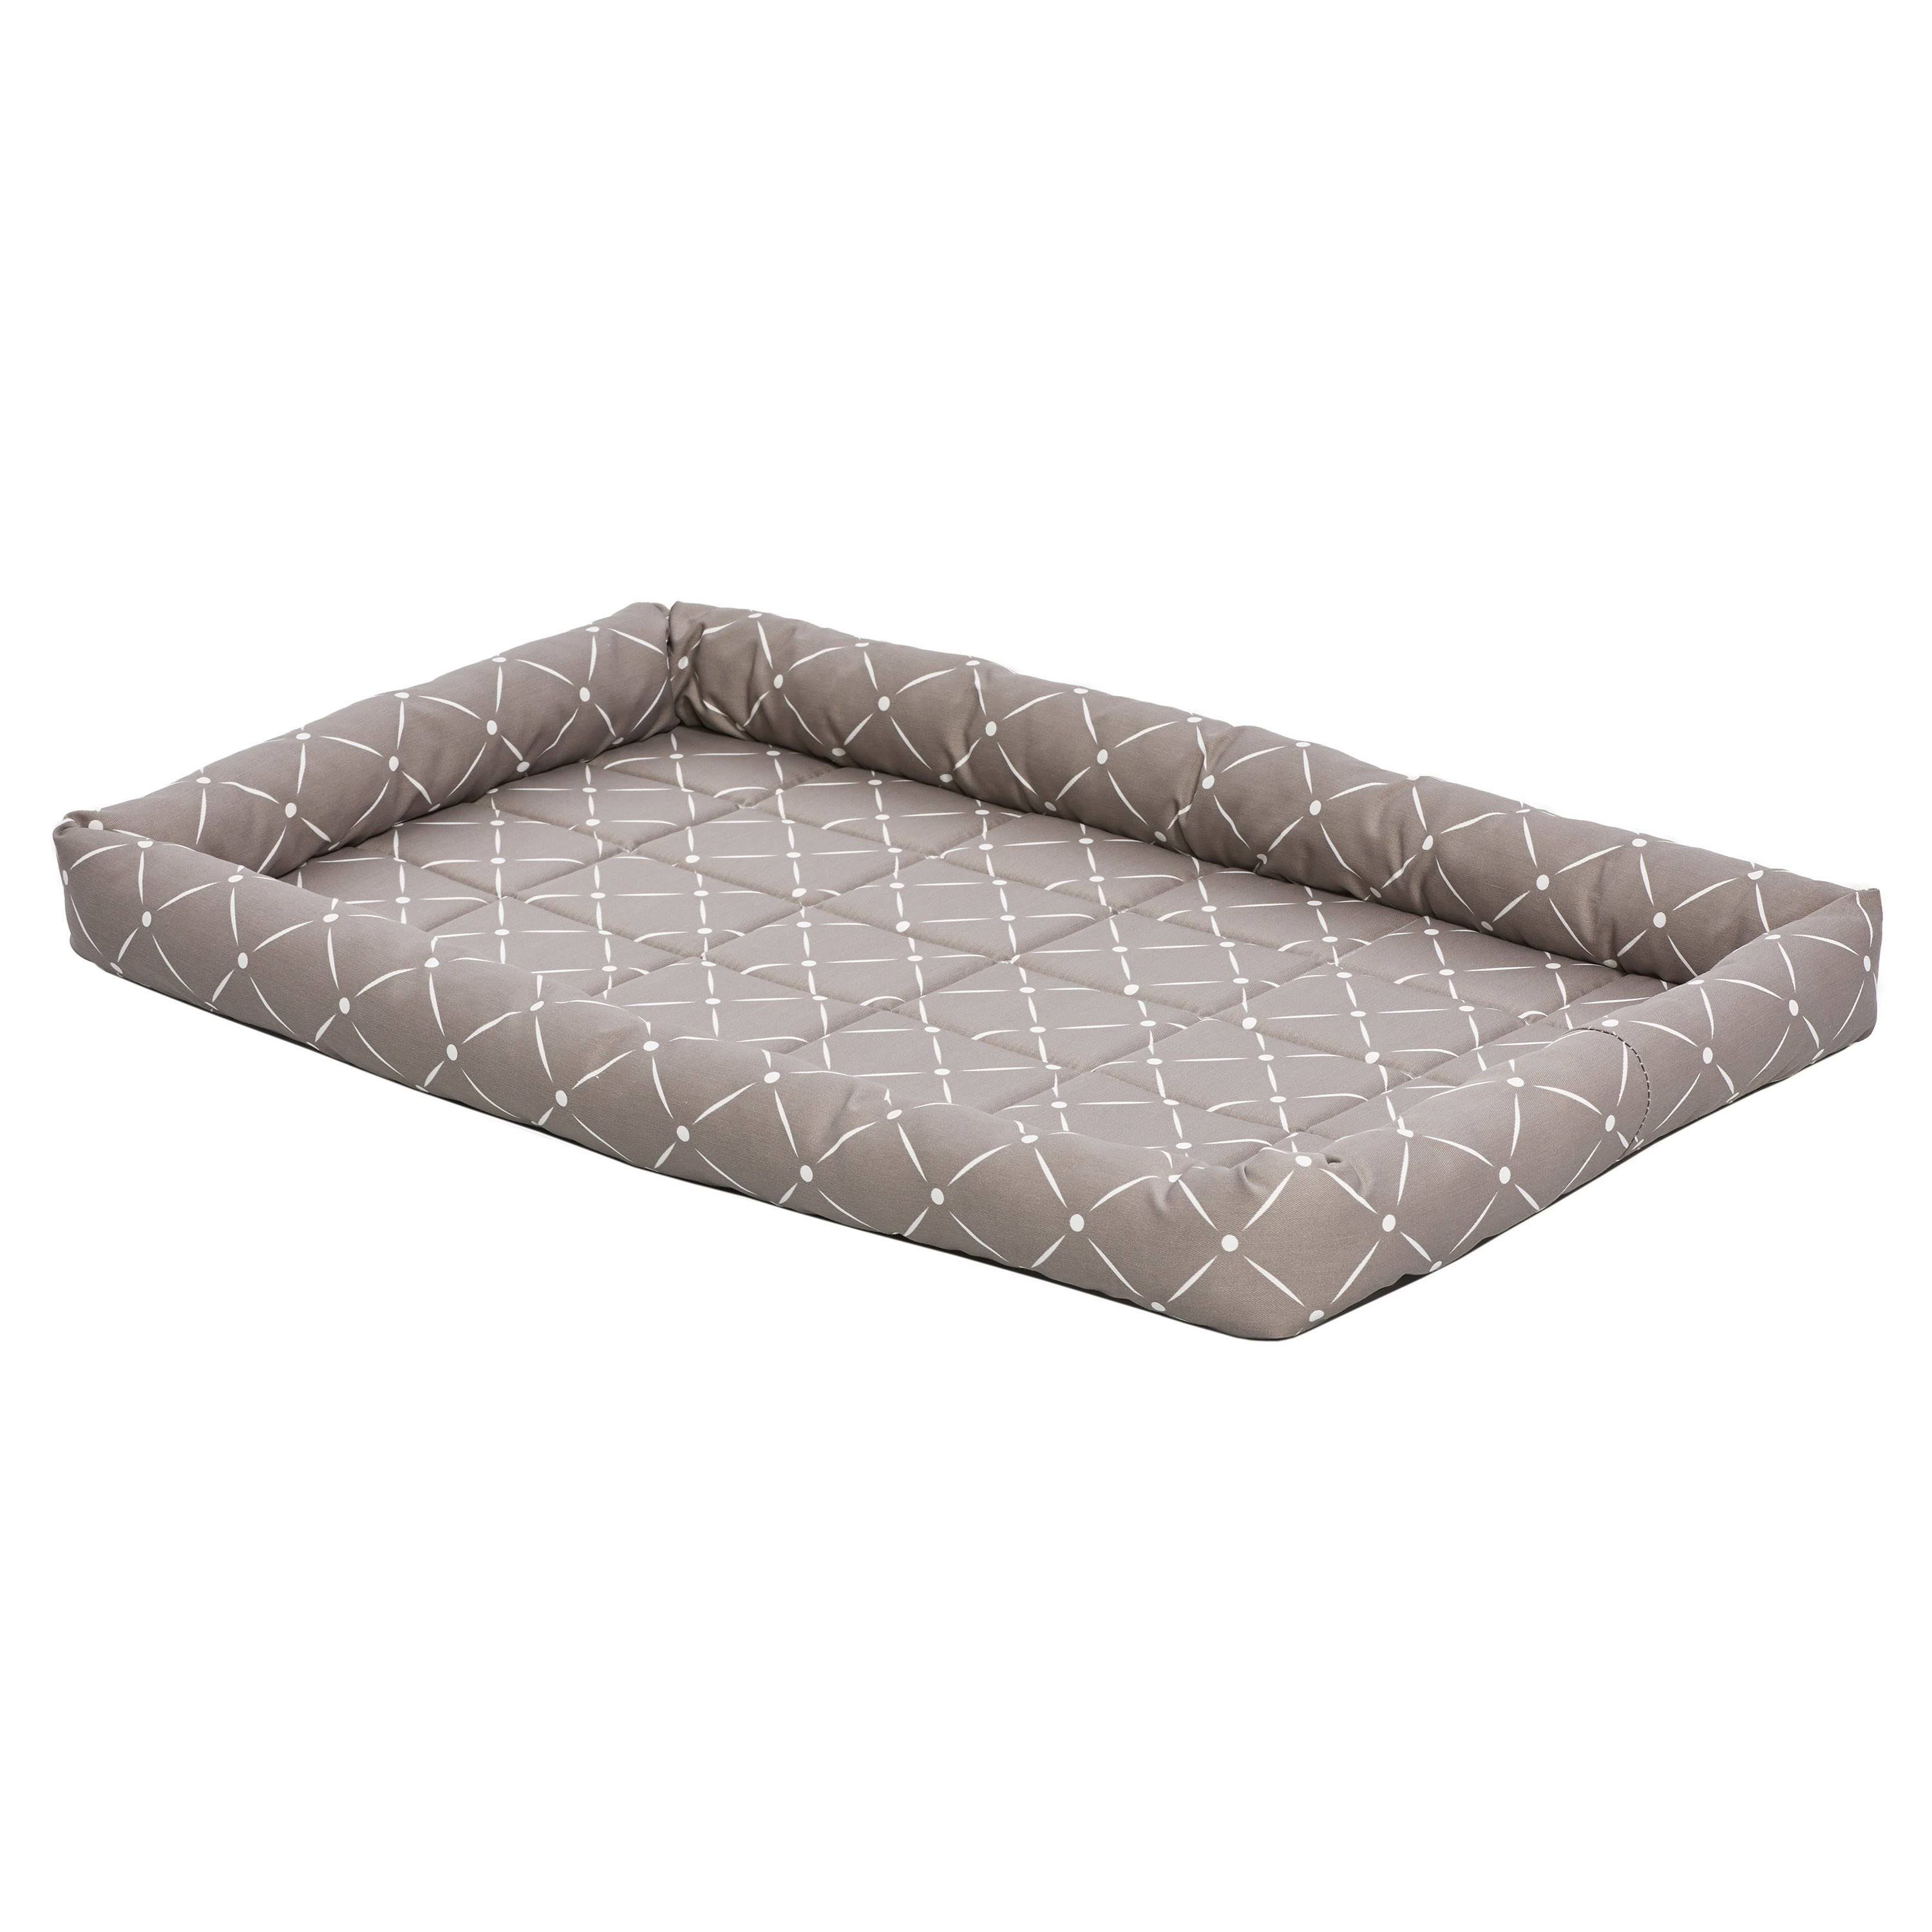 Midwest Homes Quiettime Couture Ashton Bolster Bed